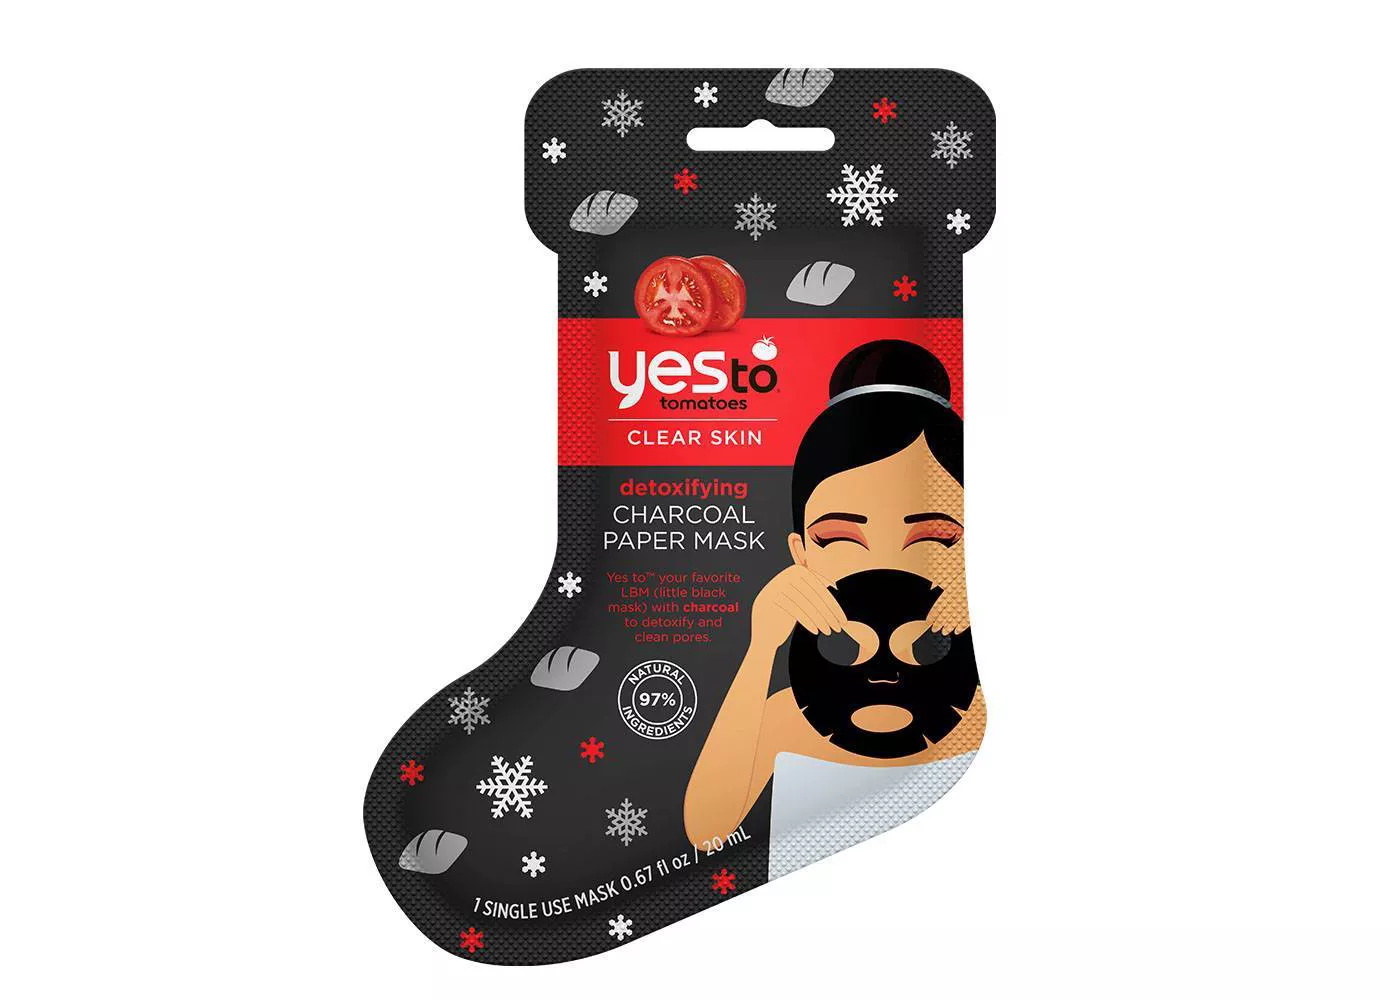 Yes To Tomatoes Clear Skin Detoxifying Charcoal Paper Mask - 0.67 fl oz - image 1 of 2